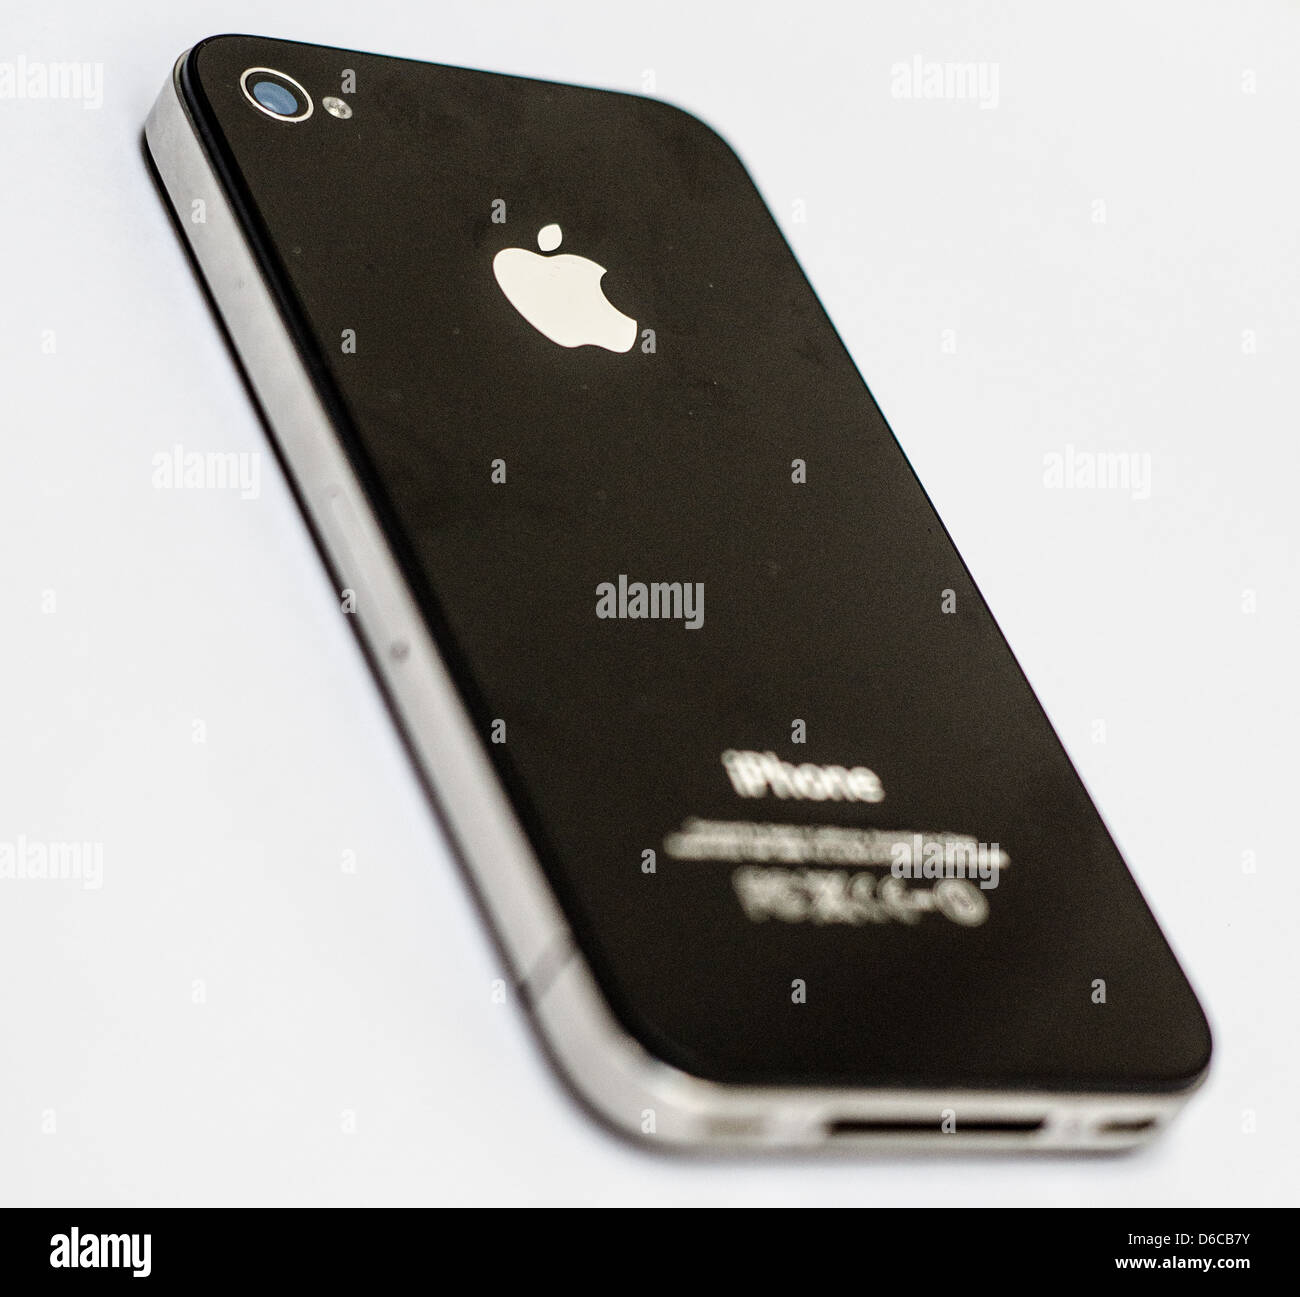 Back case of Apple iPhone. Stock Photo